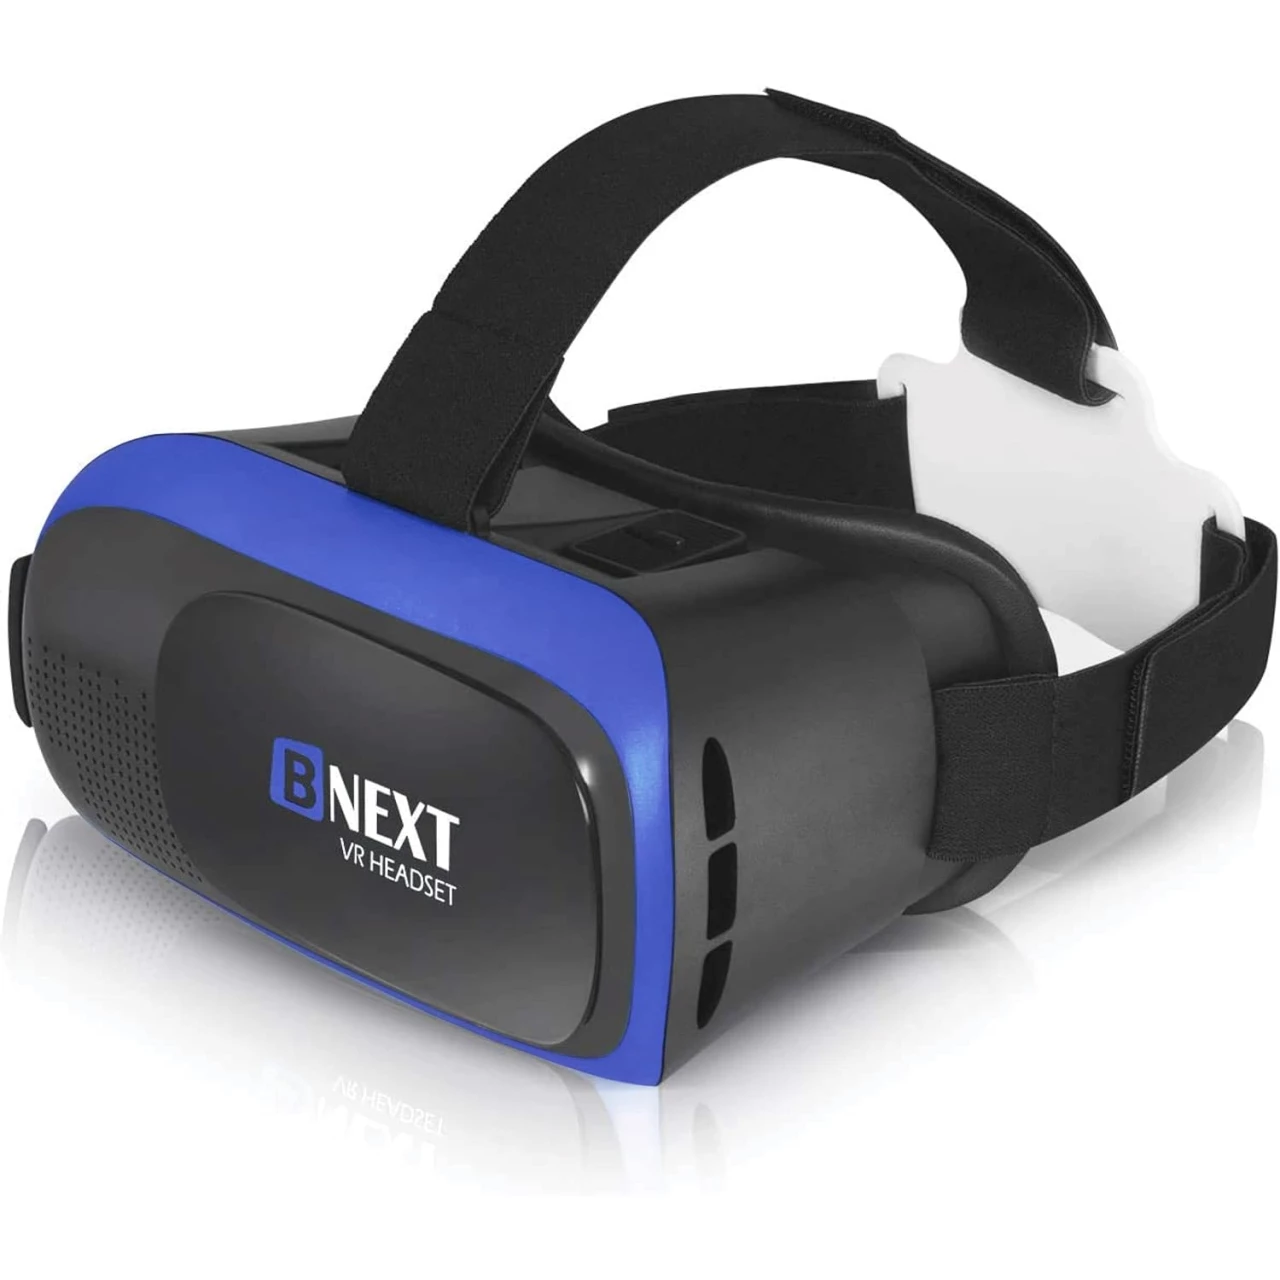 Bnext VR Headset Compatible with iPhone &amp; Android Phone - VR Headsets - Universal Virtual Reality Goggles for Kids and Adults - Cell Phone VR Headsets - Soft &amp; Comfortable New 3D VR Glasses (Blue)